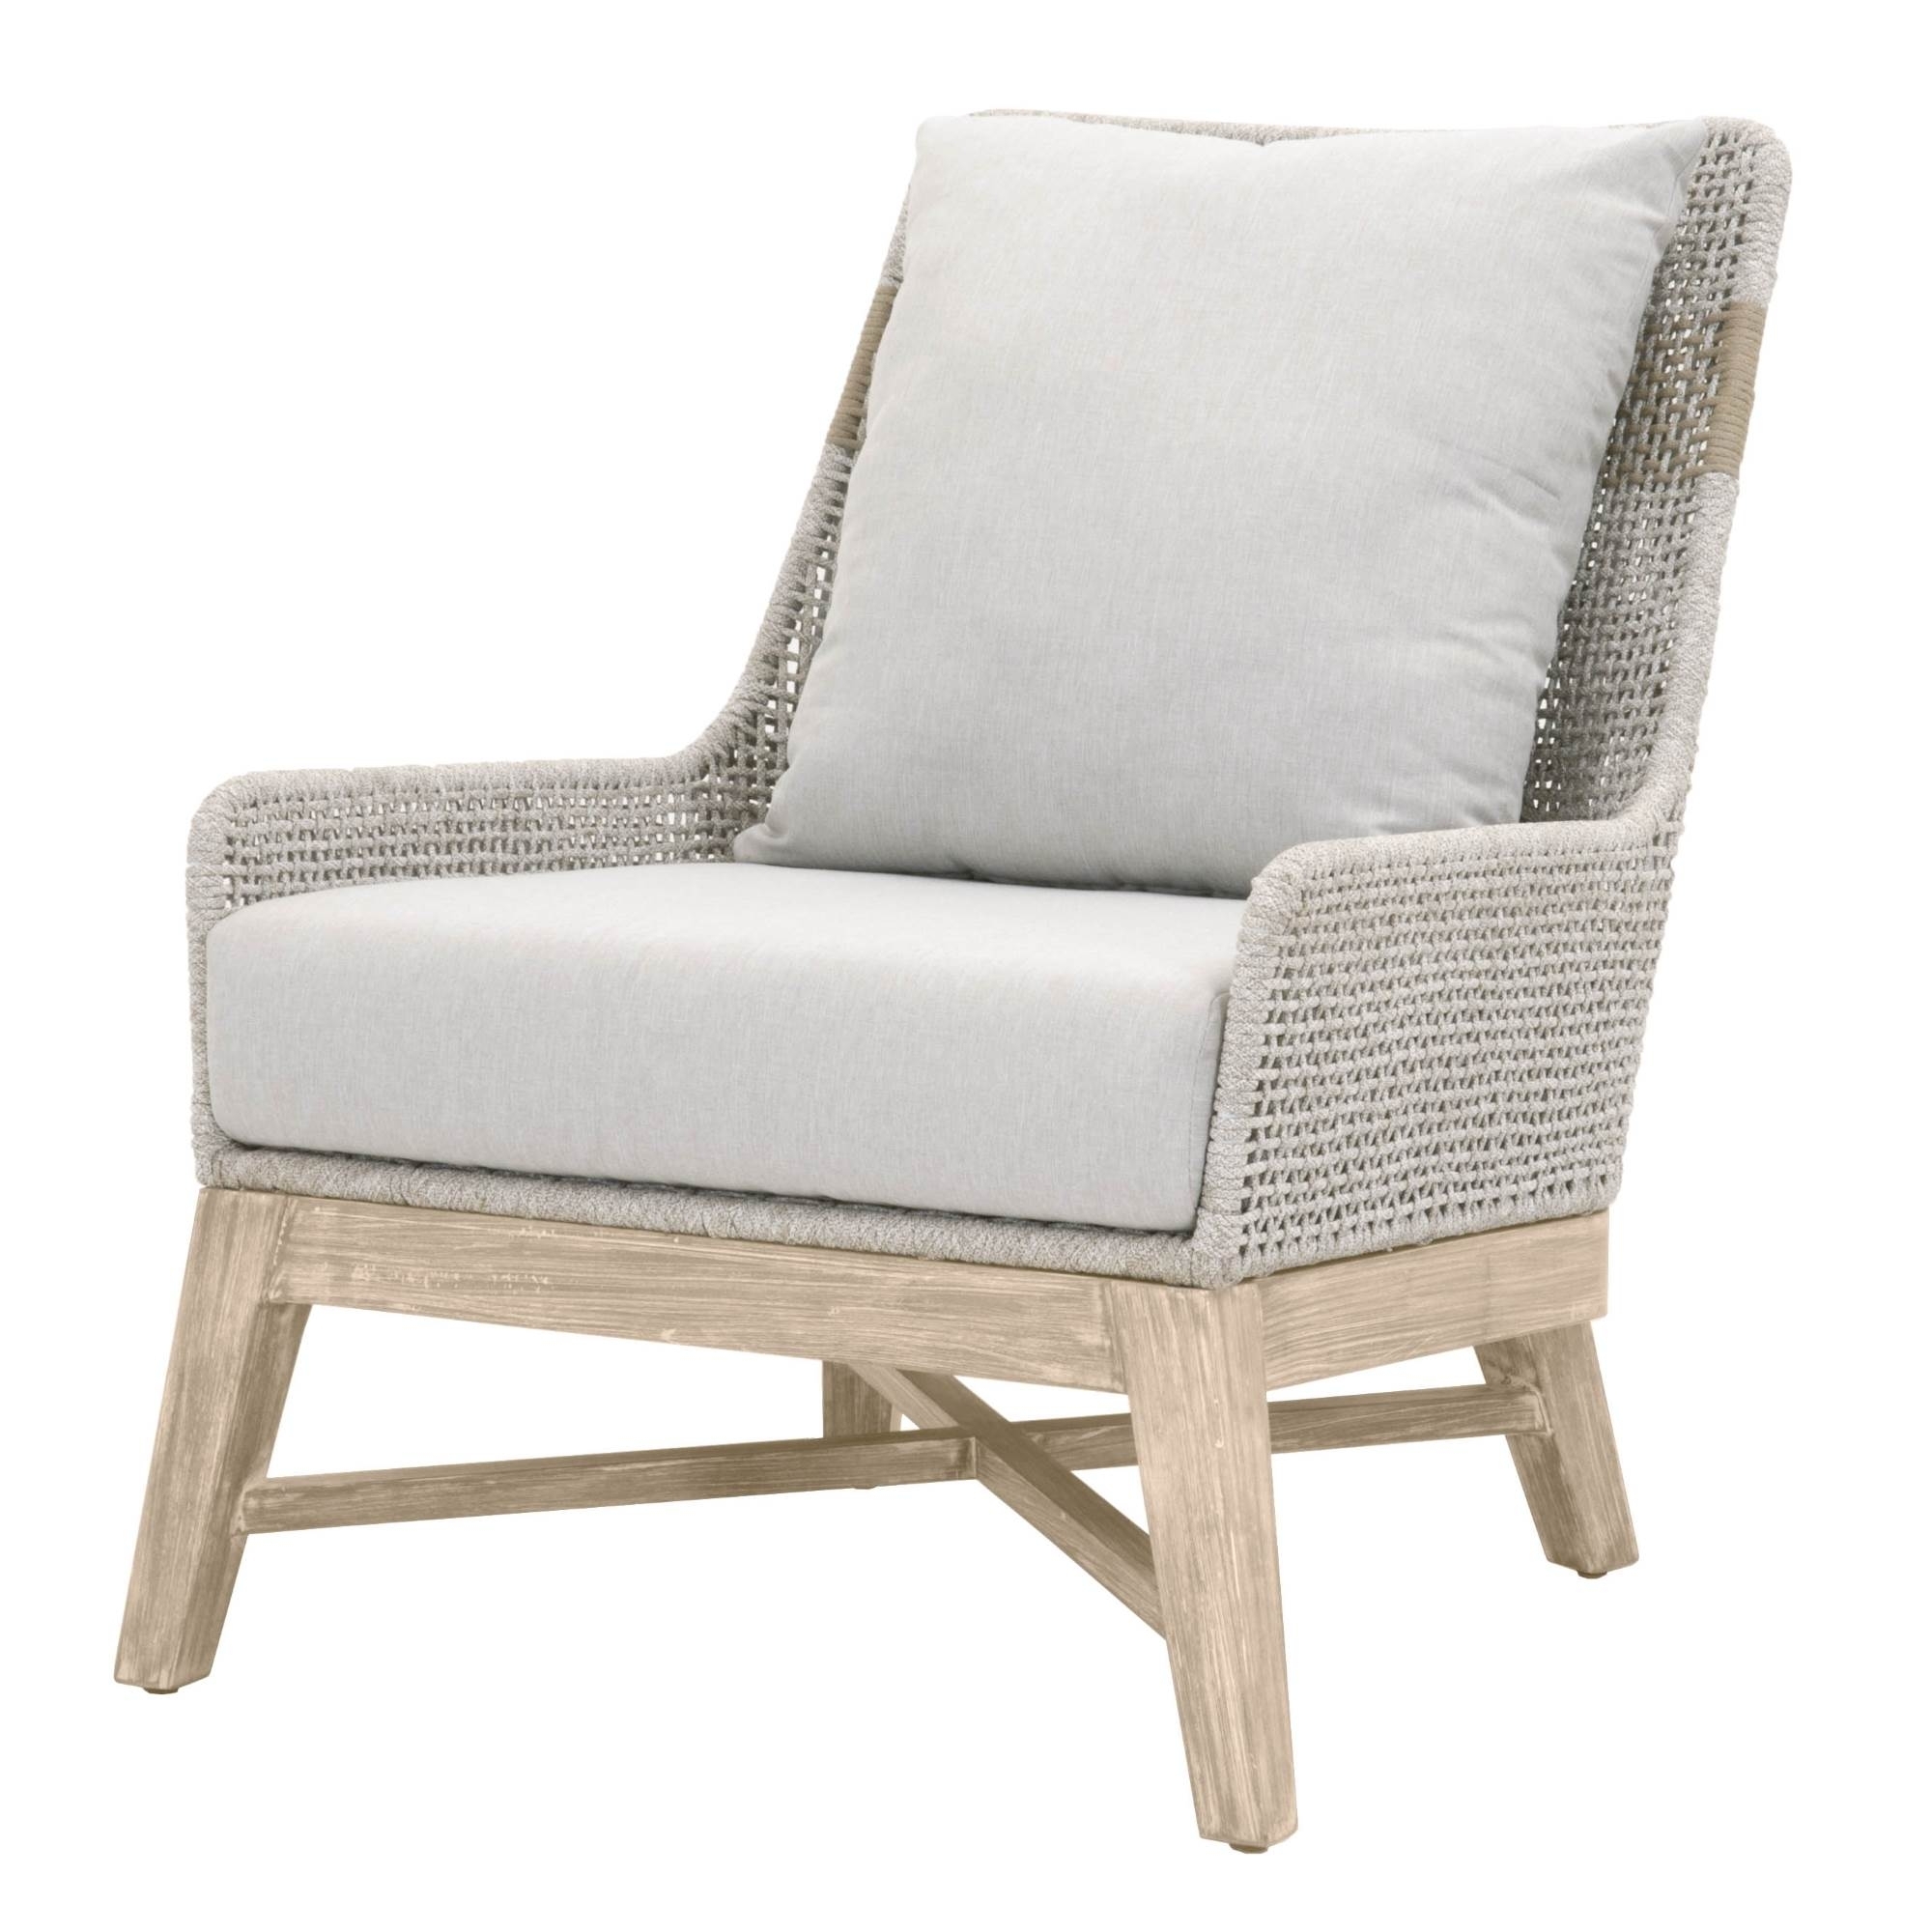 Panorama Indoor/Outdoor Club Chair, White Taupe - Image 1